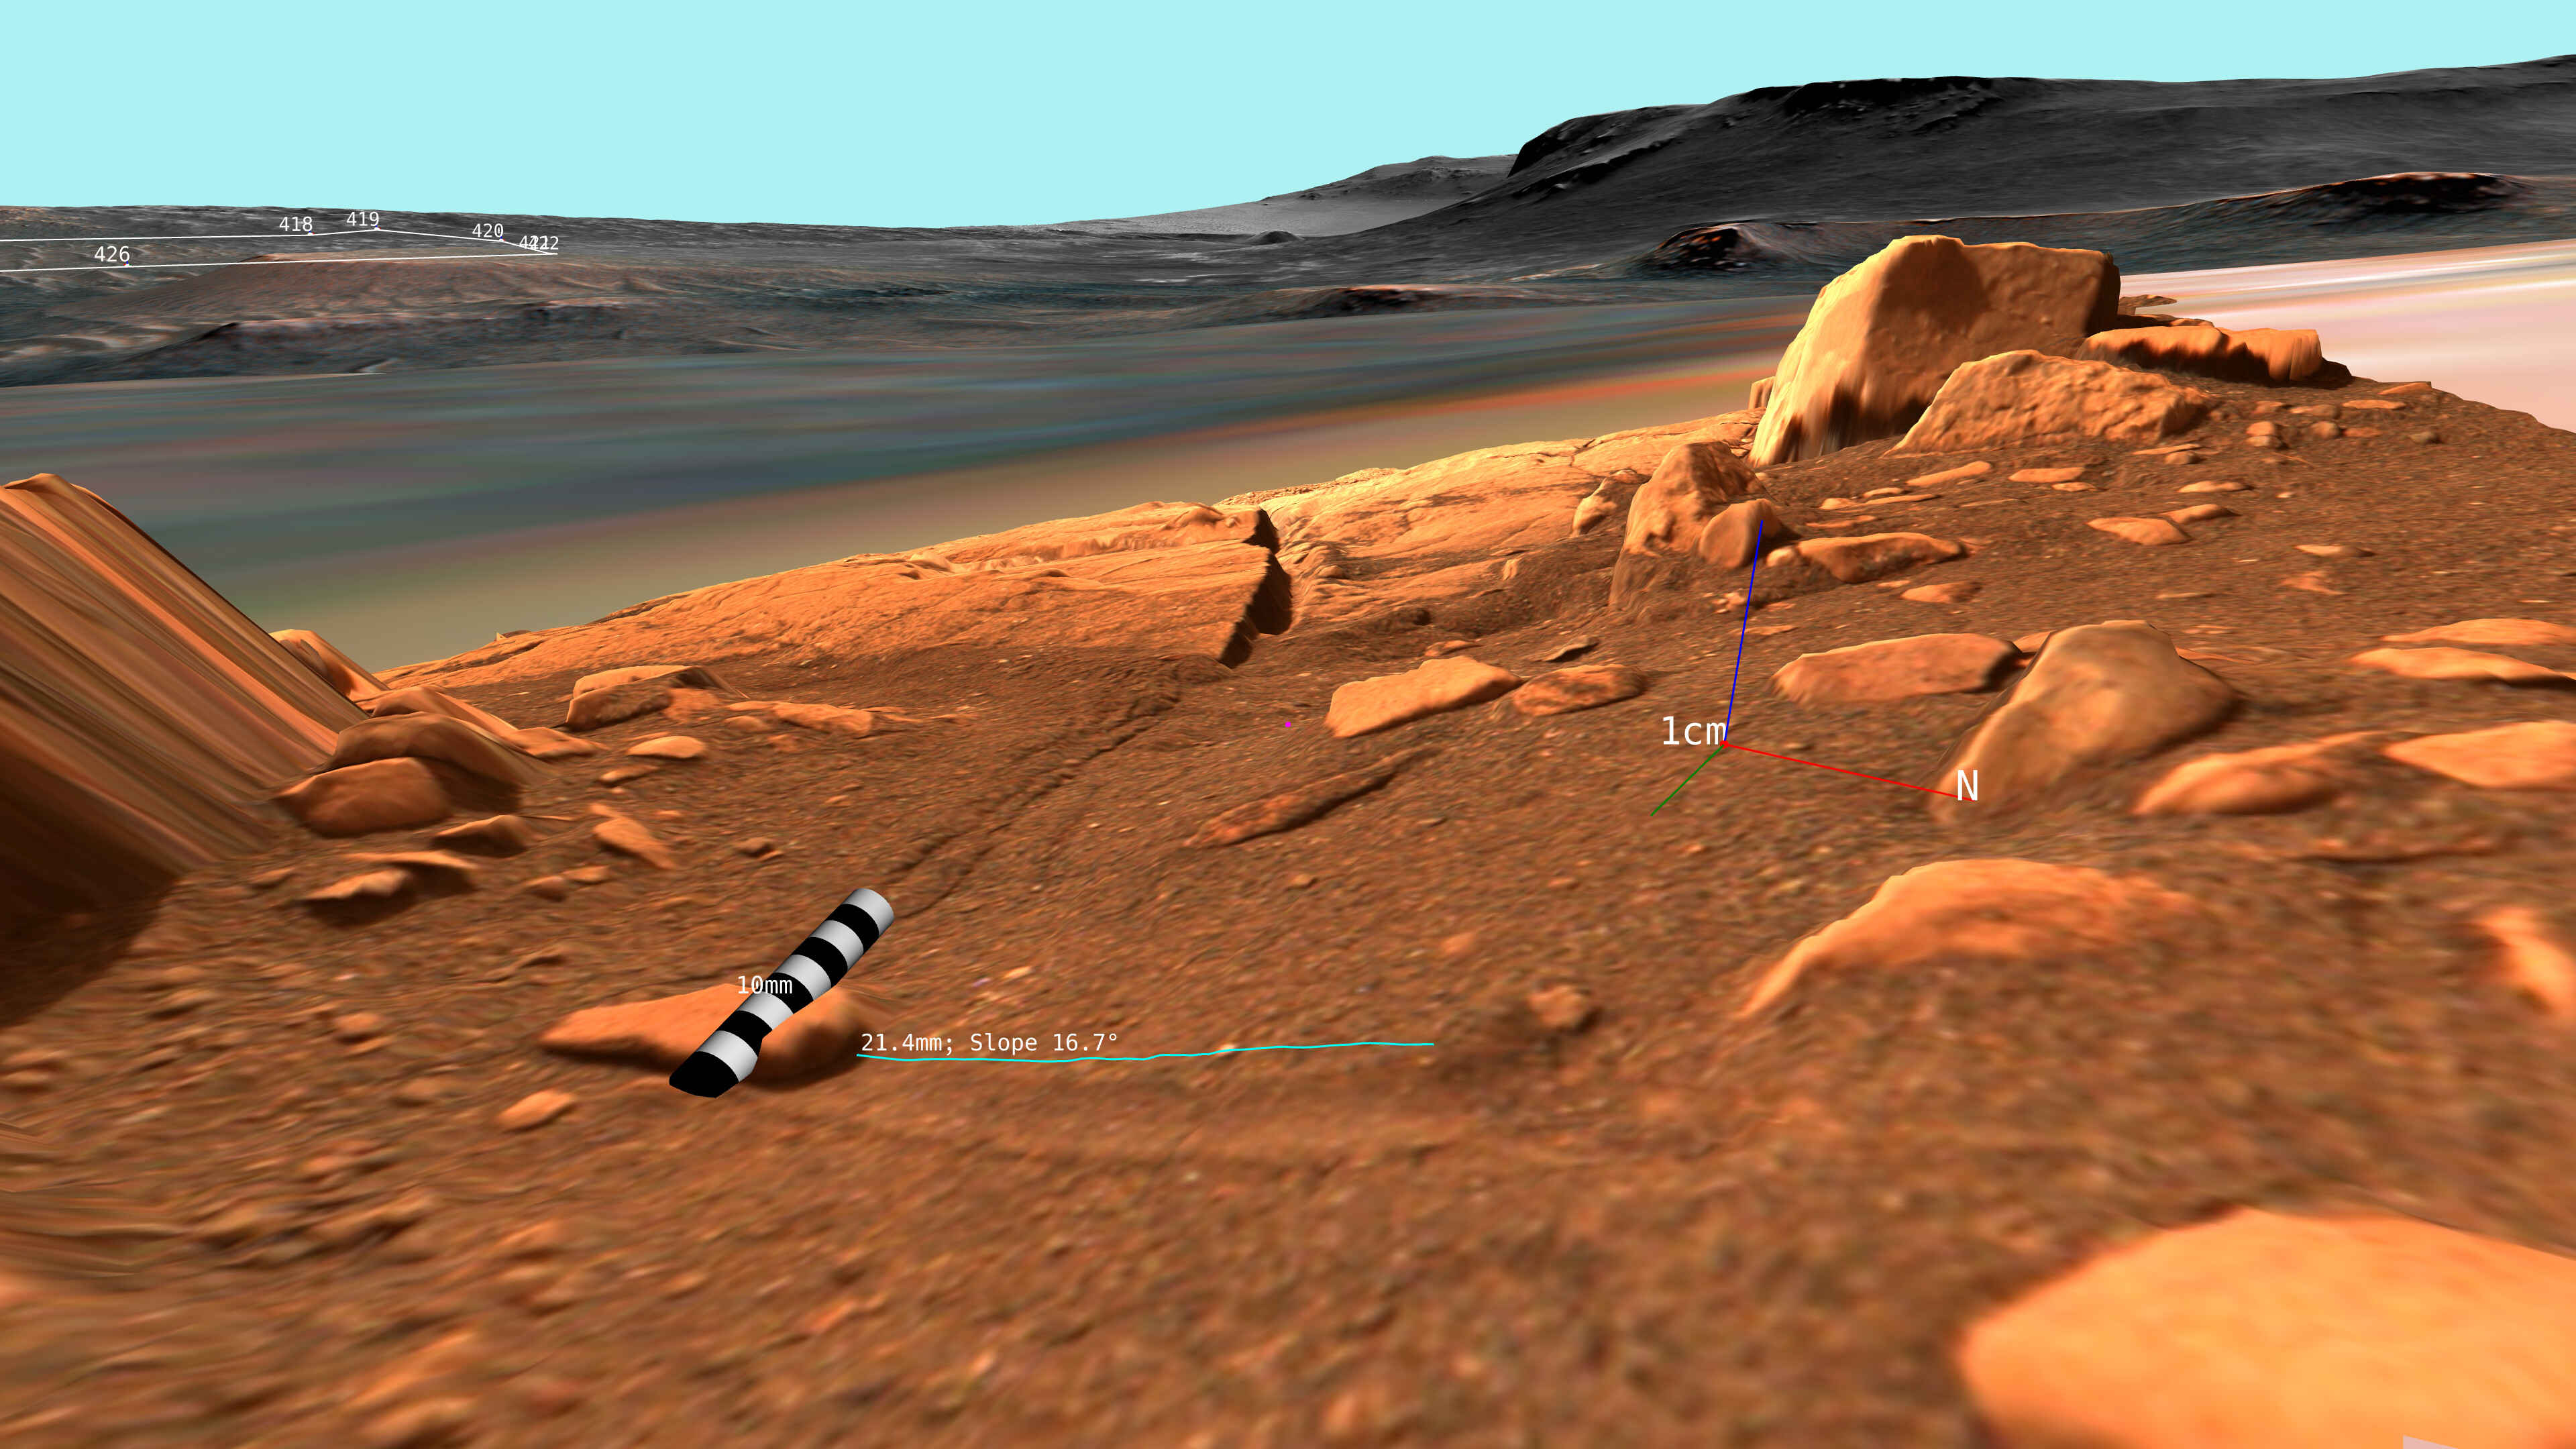 Screenshot of the PRo3D software showing Mastcam-Z imagery of the Jezero Crater on Mars